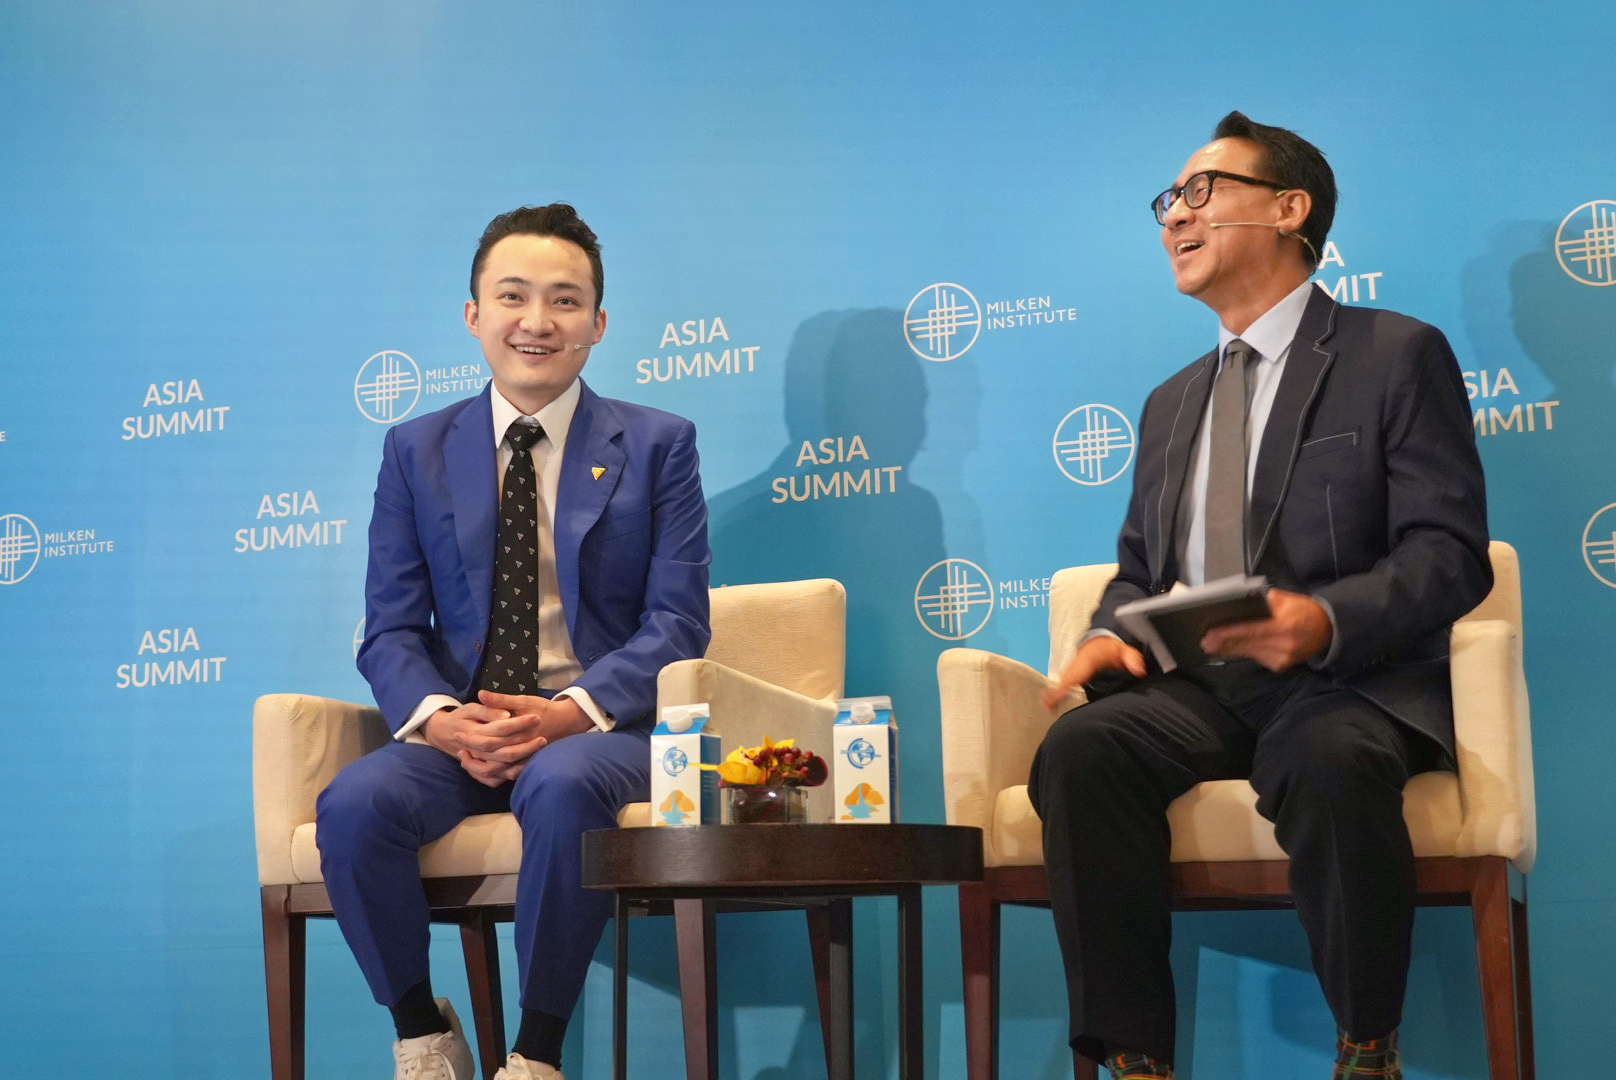 TRON Founder Attends Milken Institute Asia Summit, Presenting TRON’s Vision on Inclusive Finance